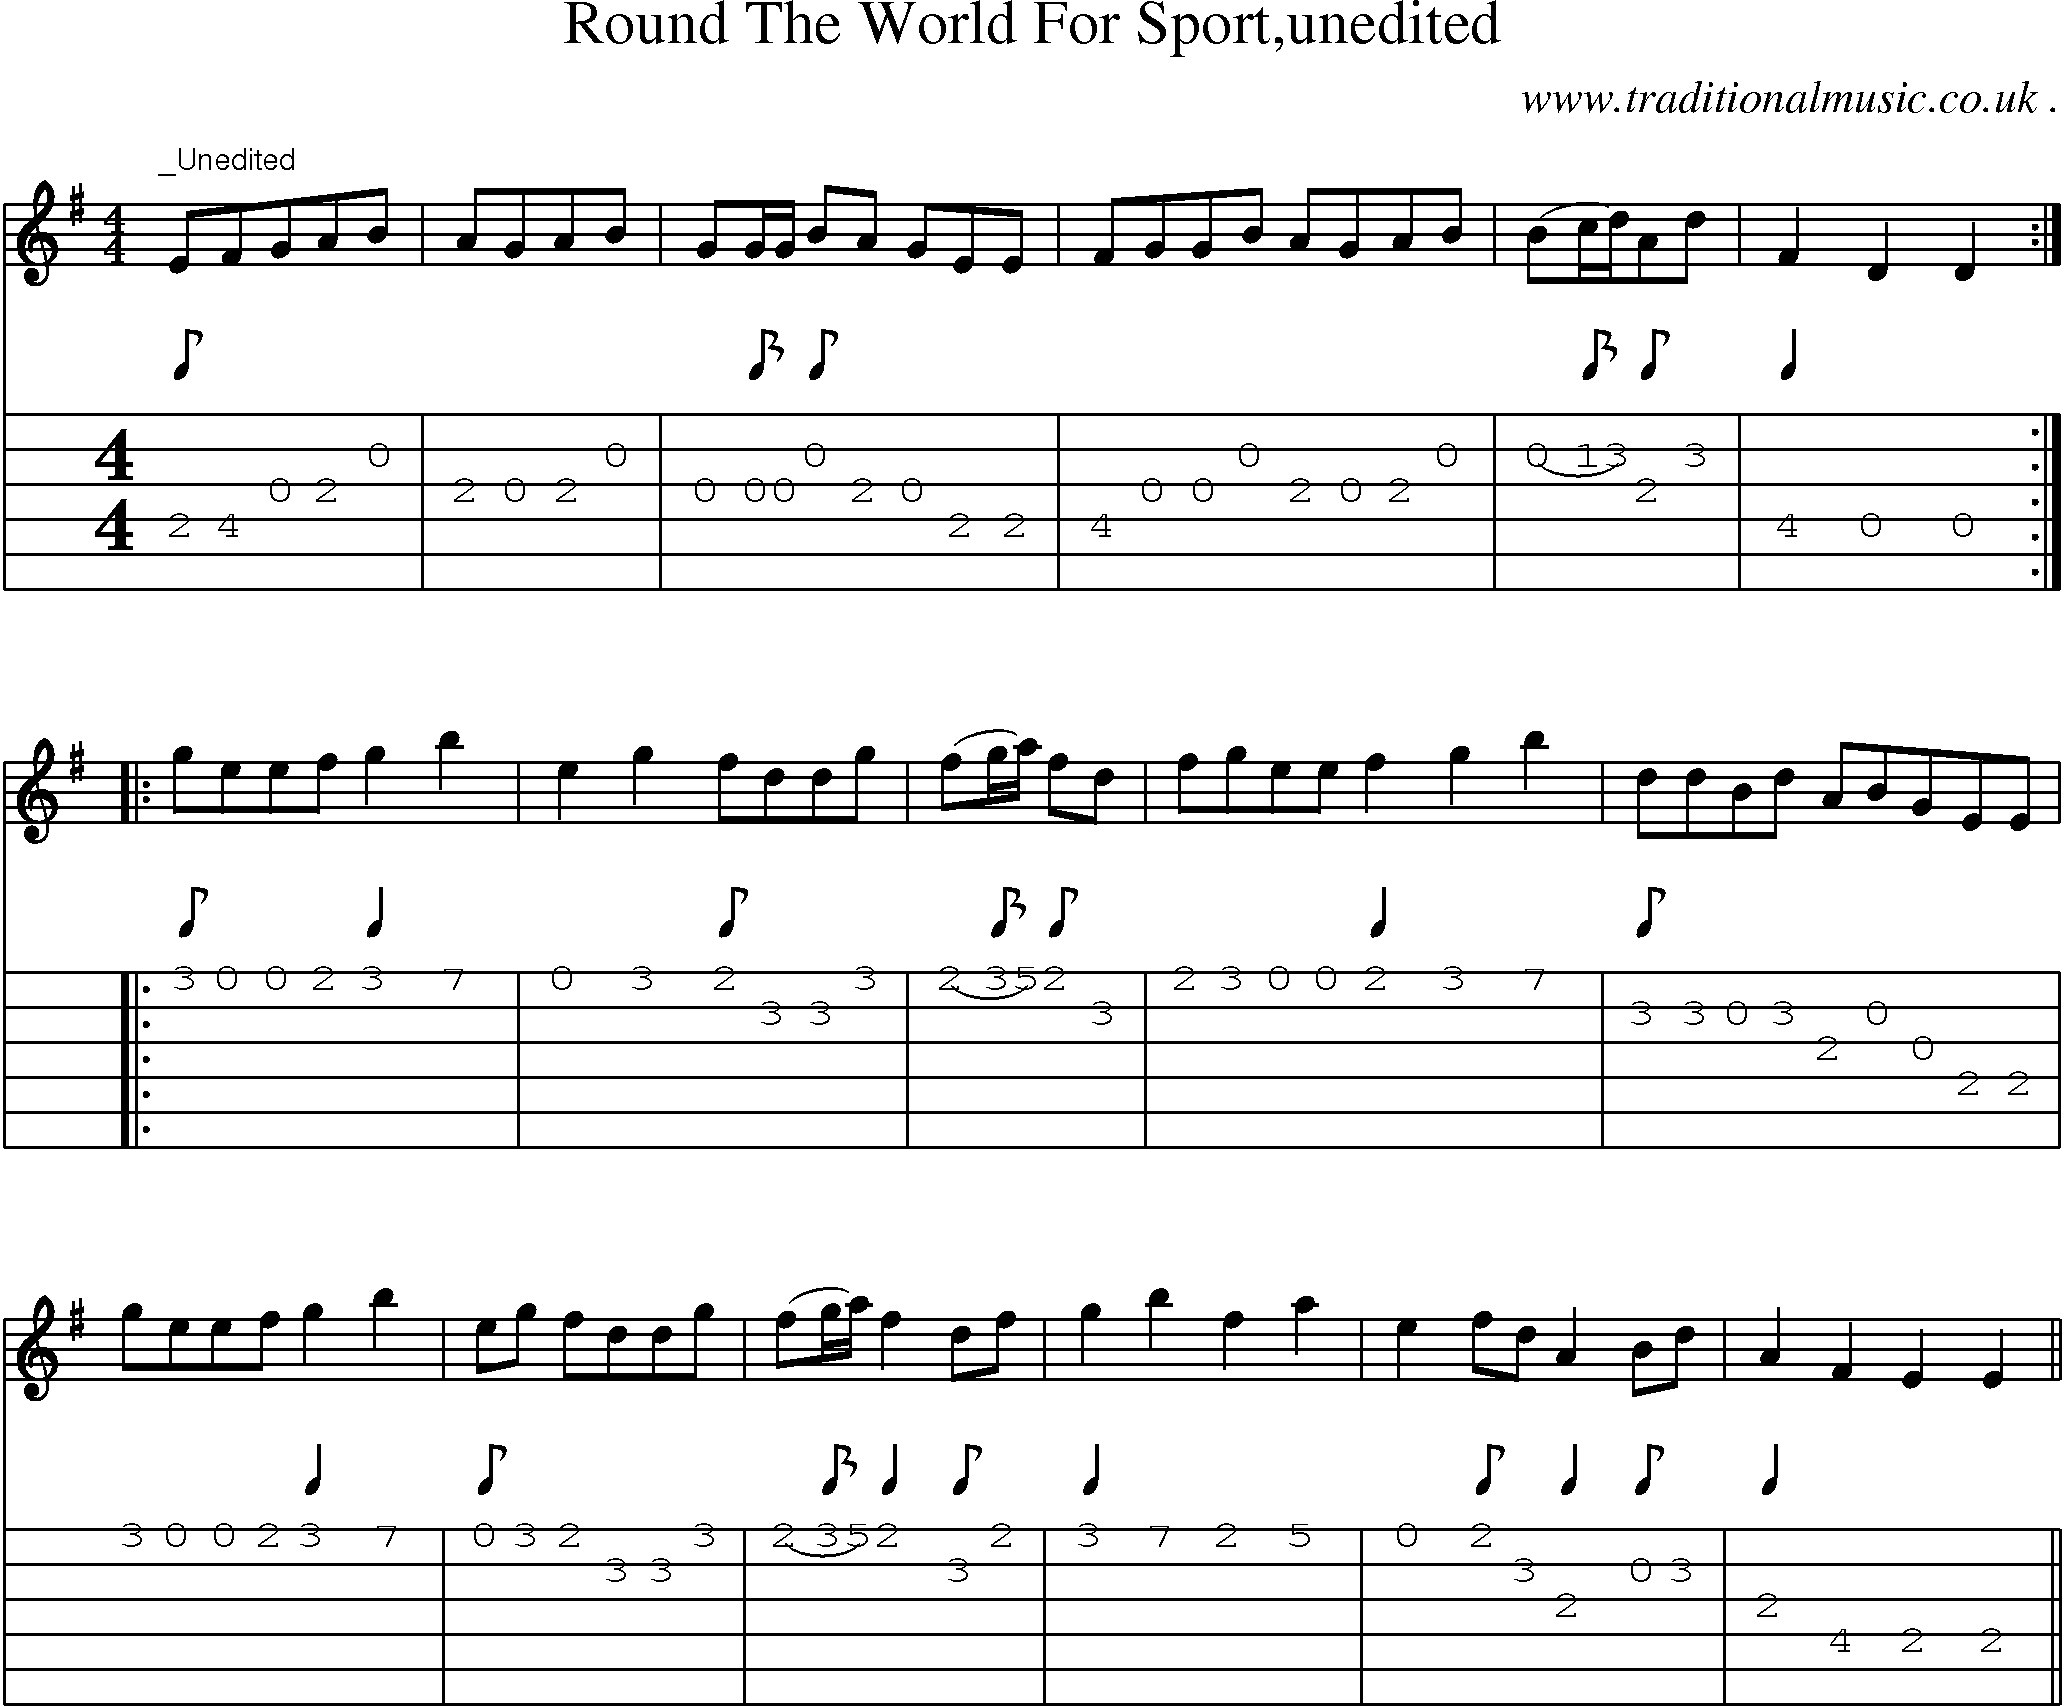 Sheet-Music and Guitar Tabs for Round The World For Sportunedited